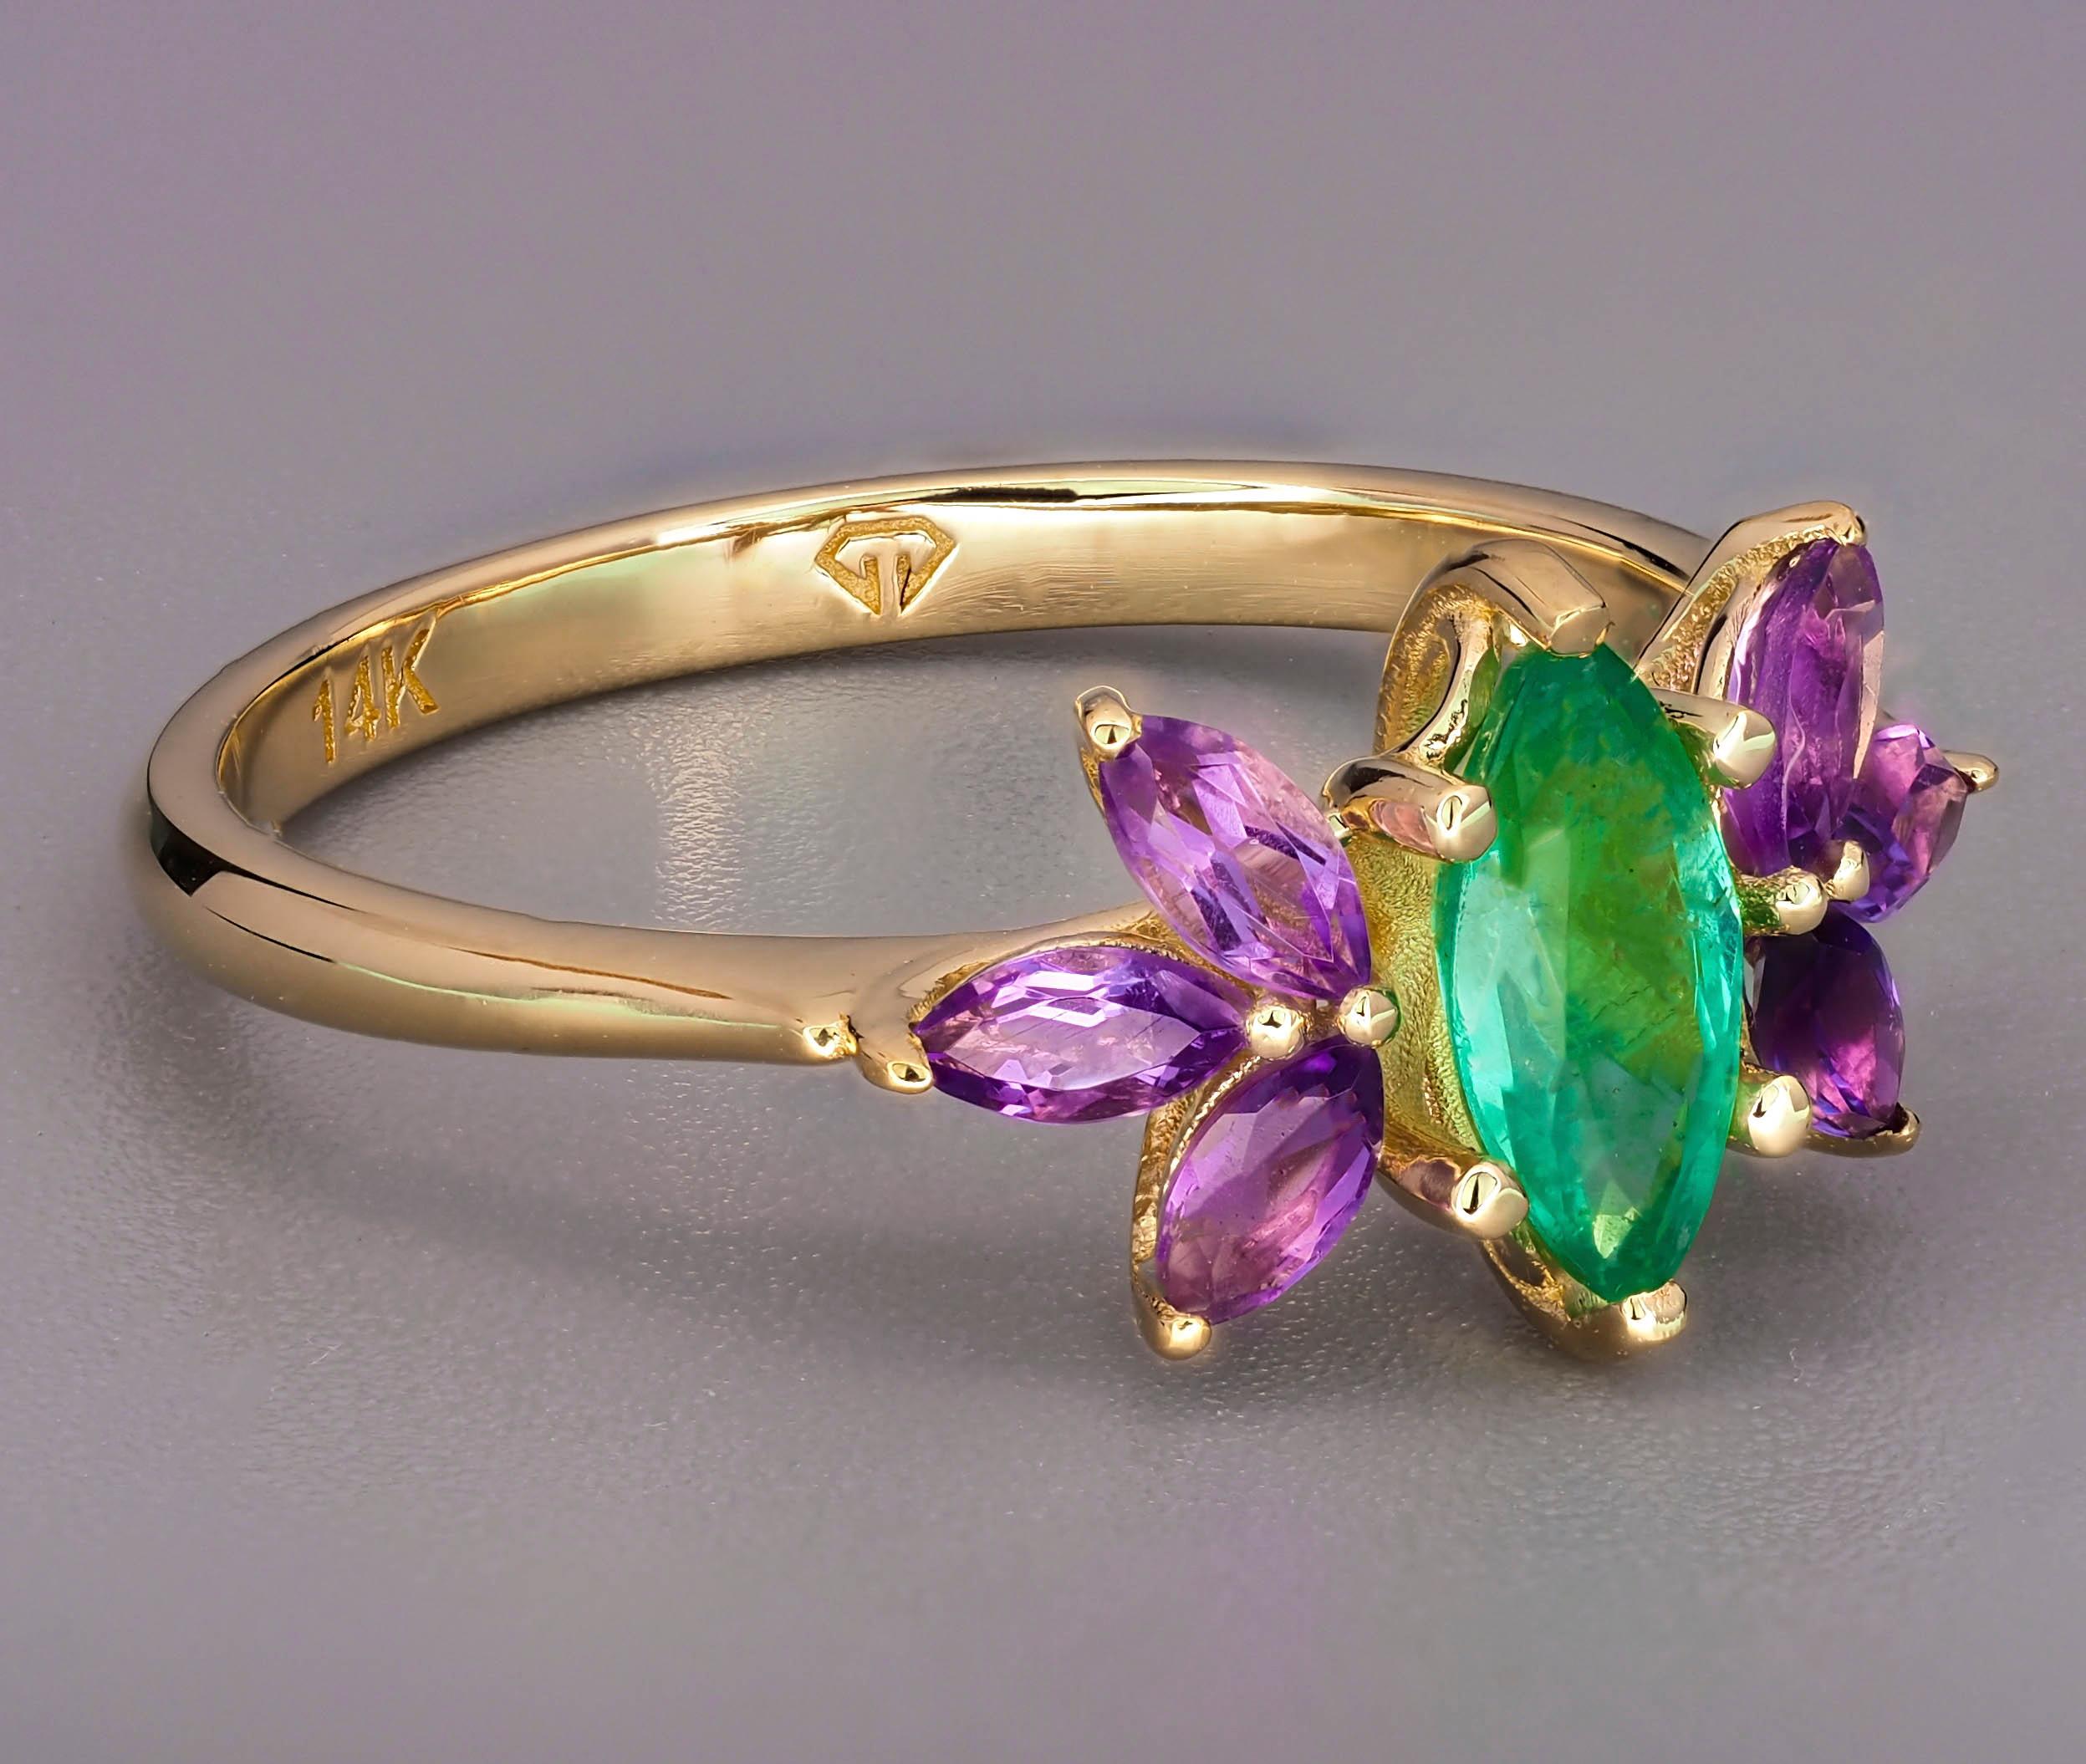 For Sale:  Emerald gold ring. 14k Gold Ring with Marquise Emerald and Amethysts.  2